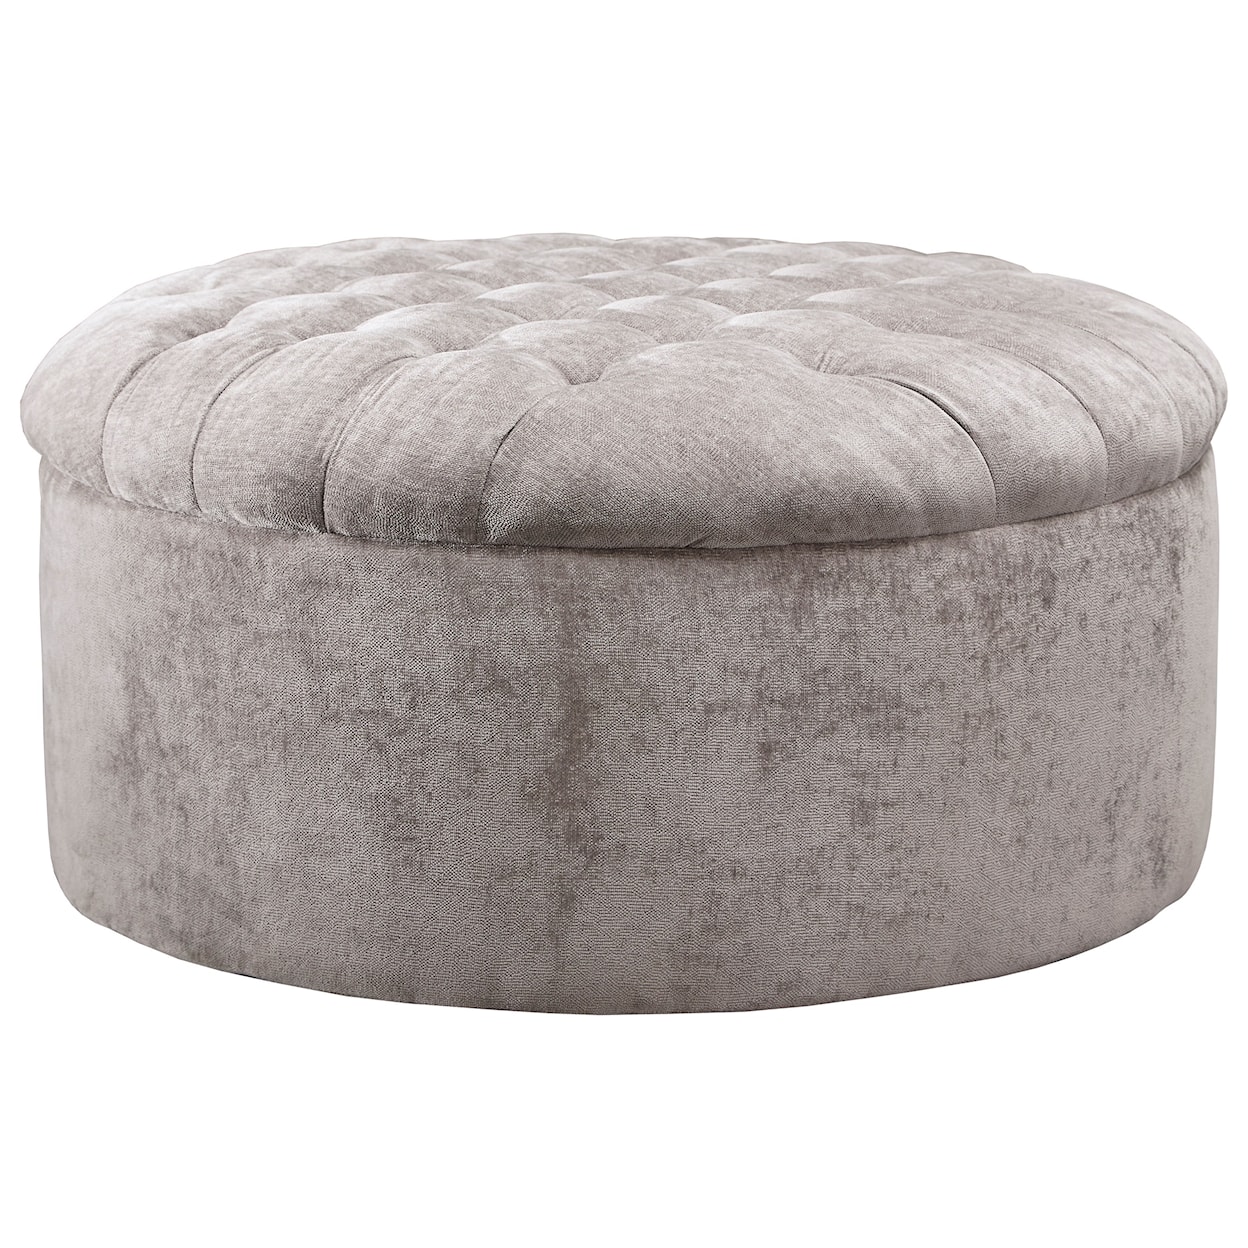 Benchcraft Carnaby Oversized Accent Ottoman